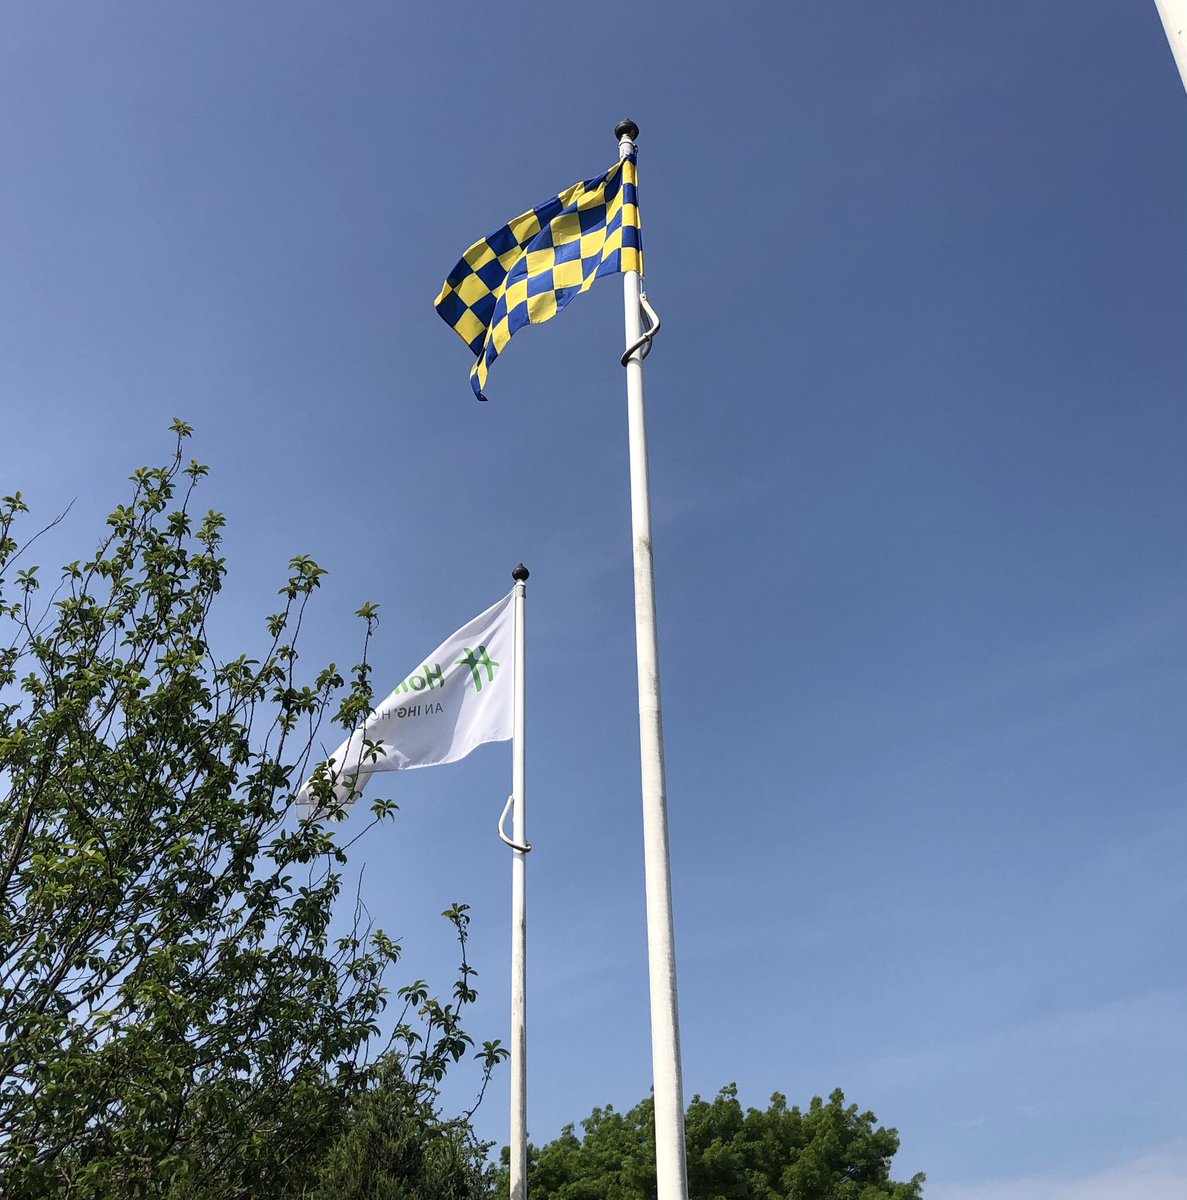 Great to see the #Surrey flag flying at @HolidayInnGuild for #SurreyDay 🔵🌕